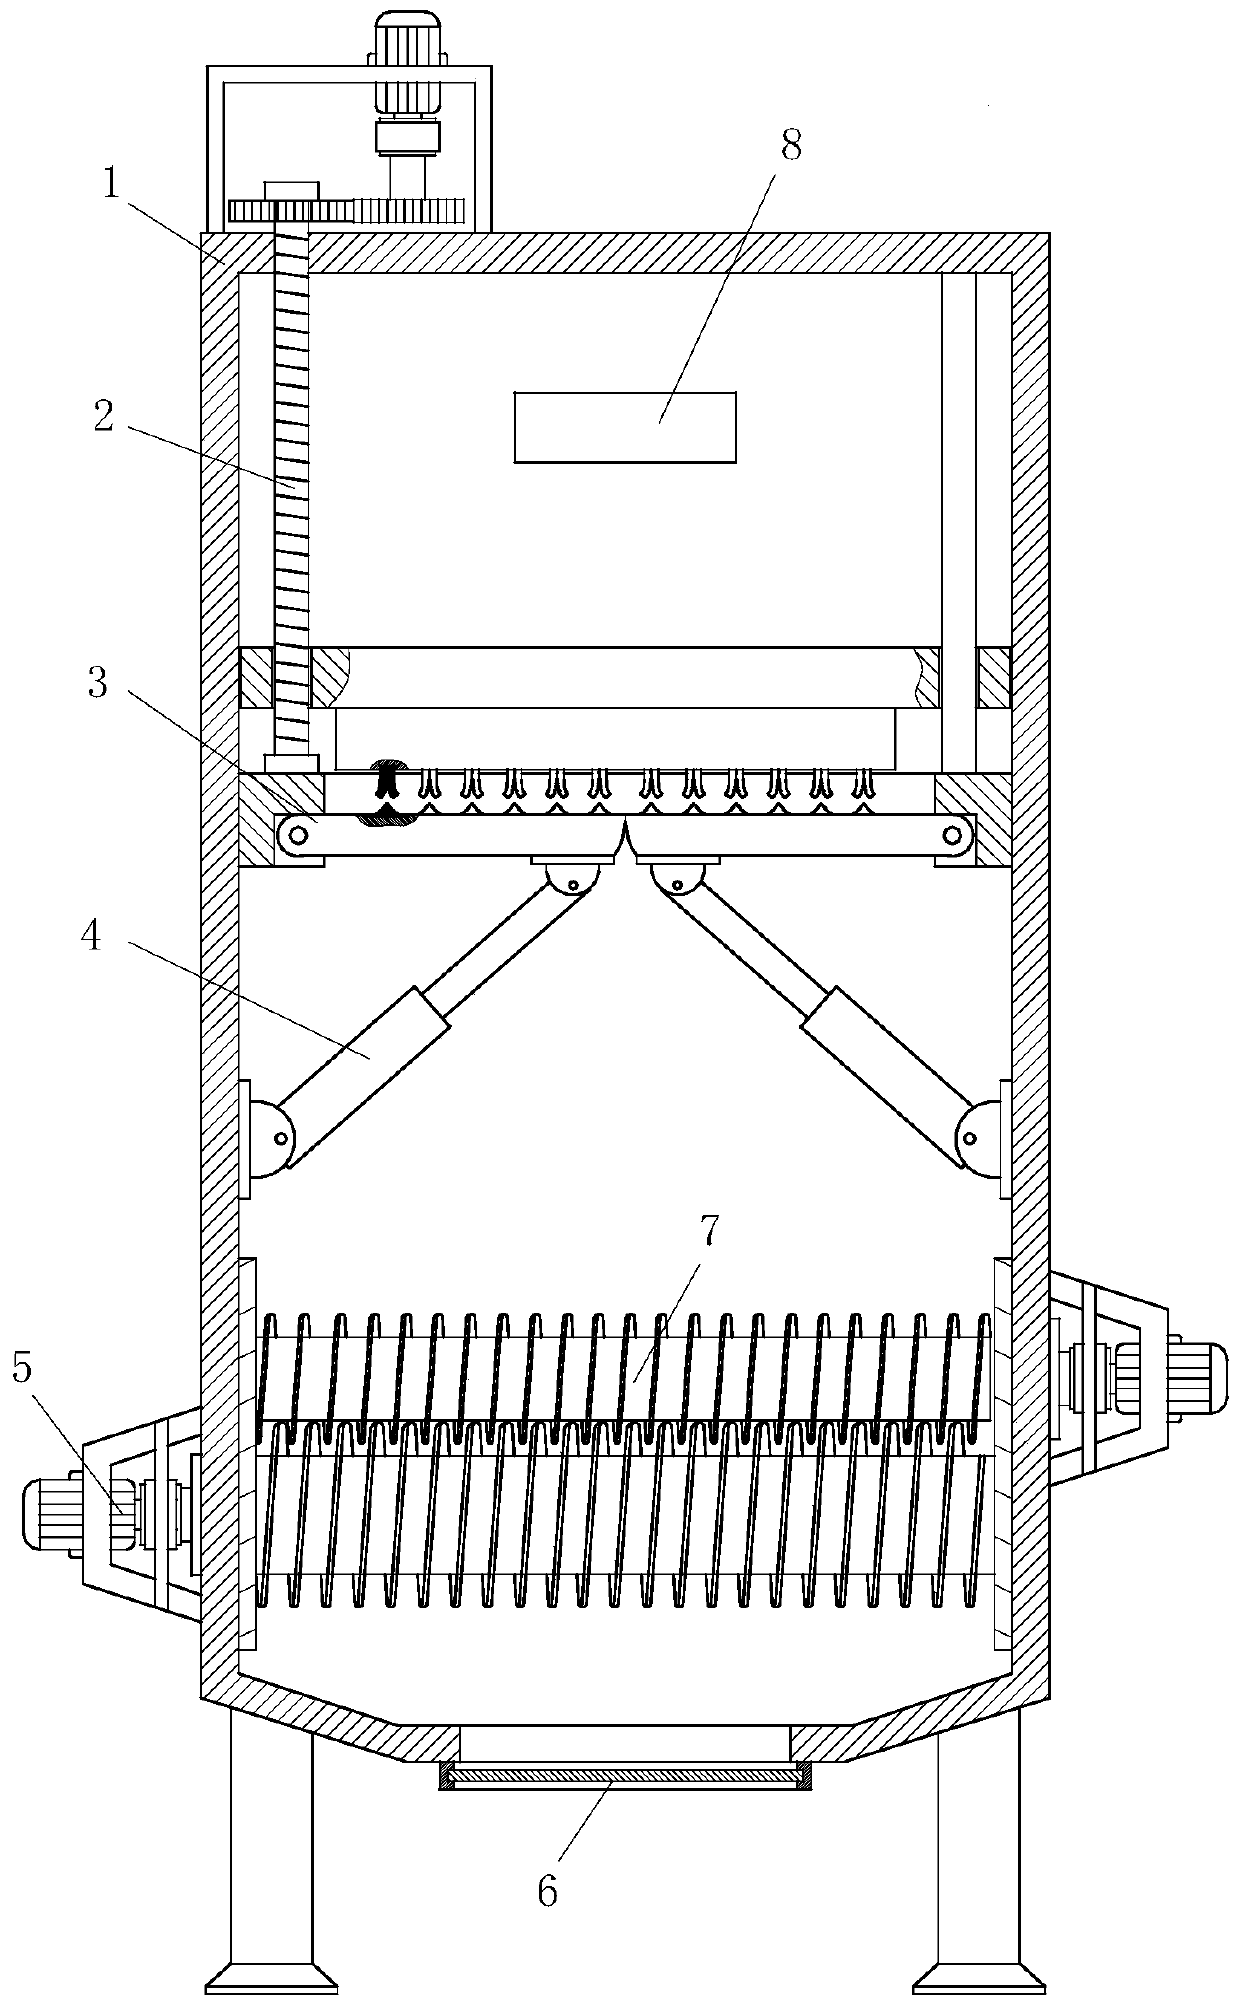 Solid waste treatment system with pre-treatment step